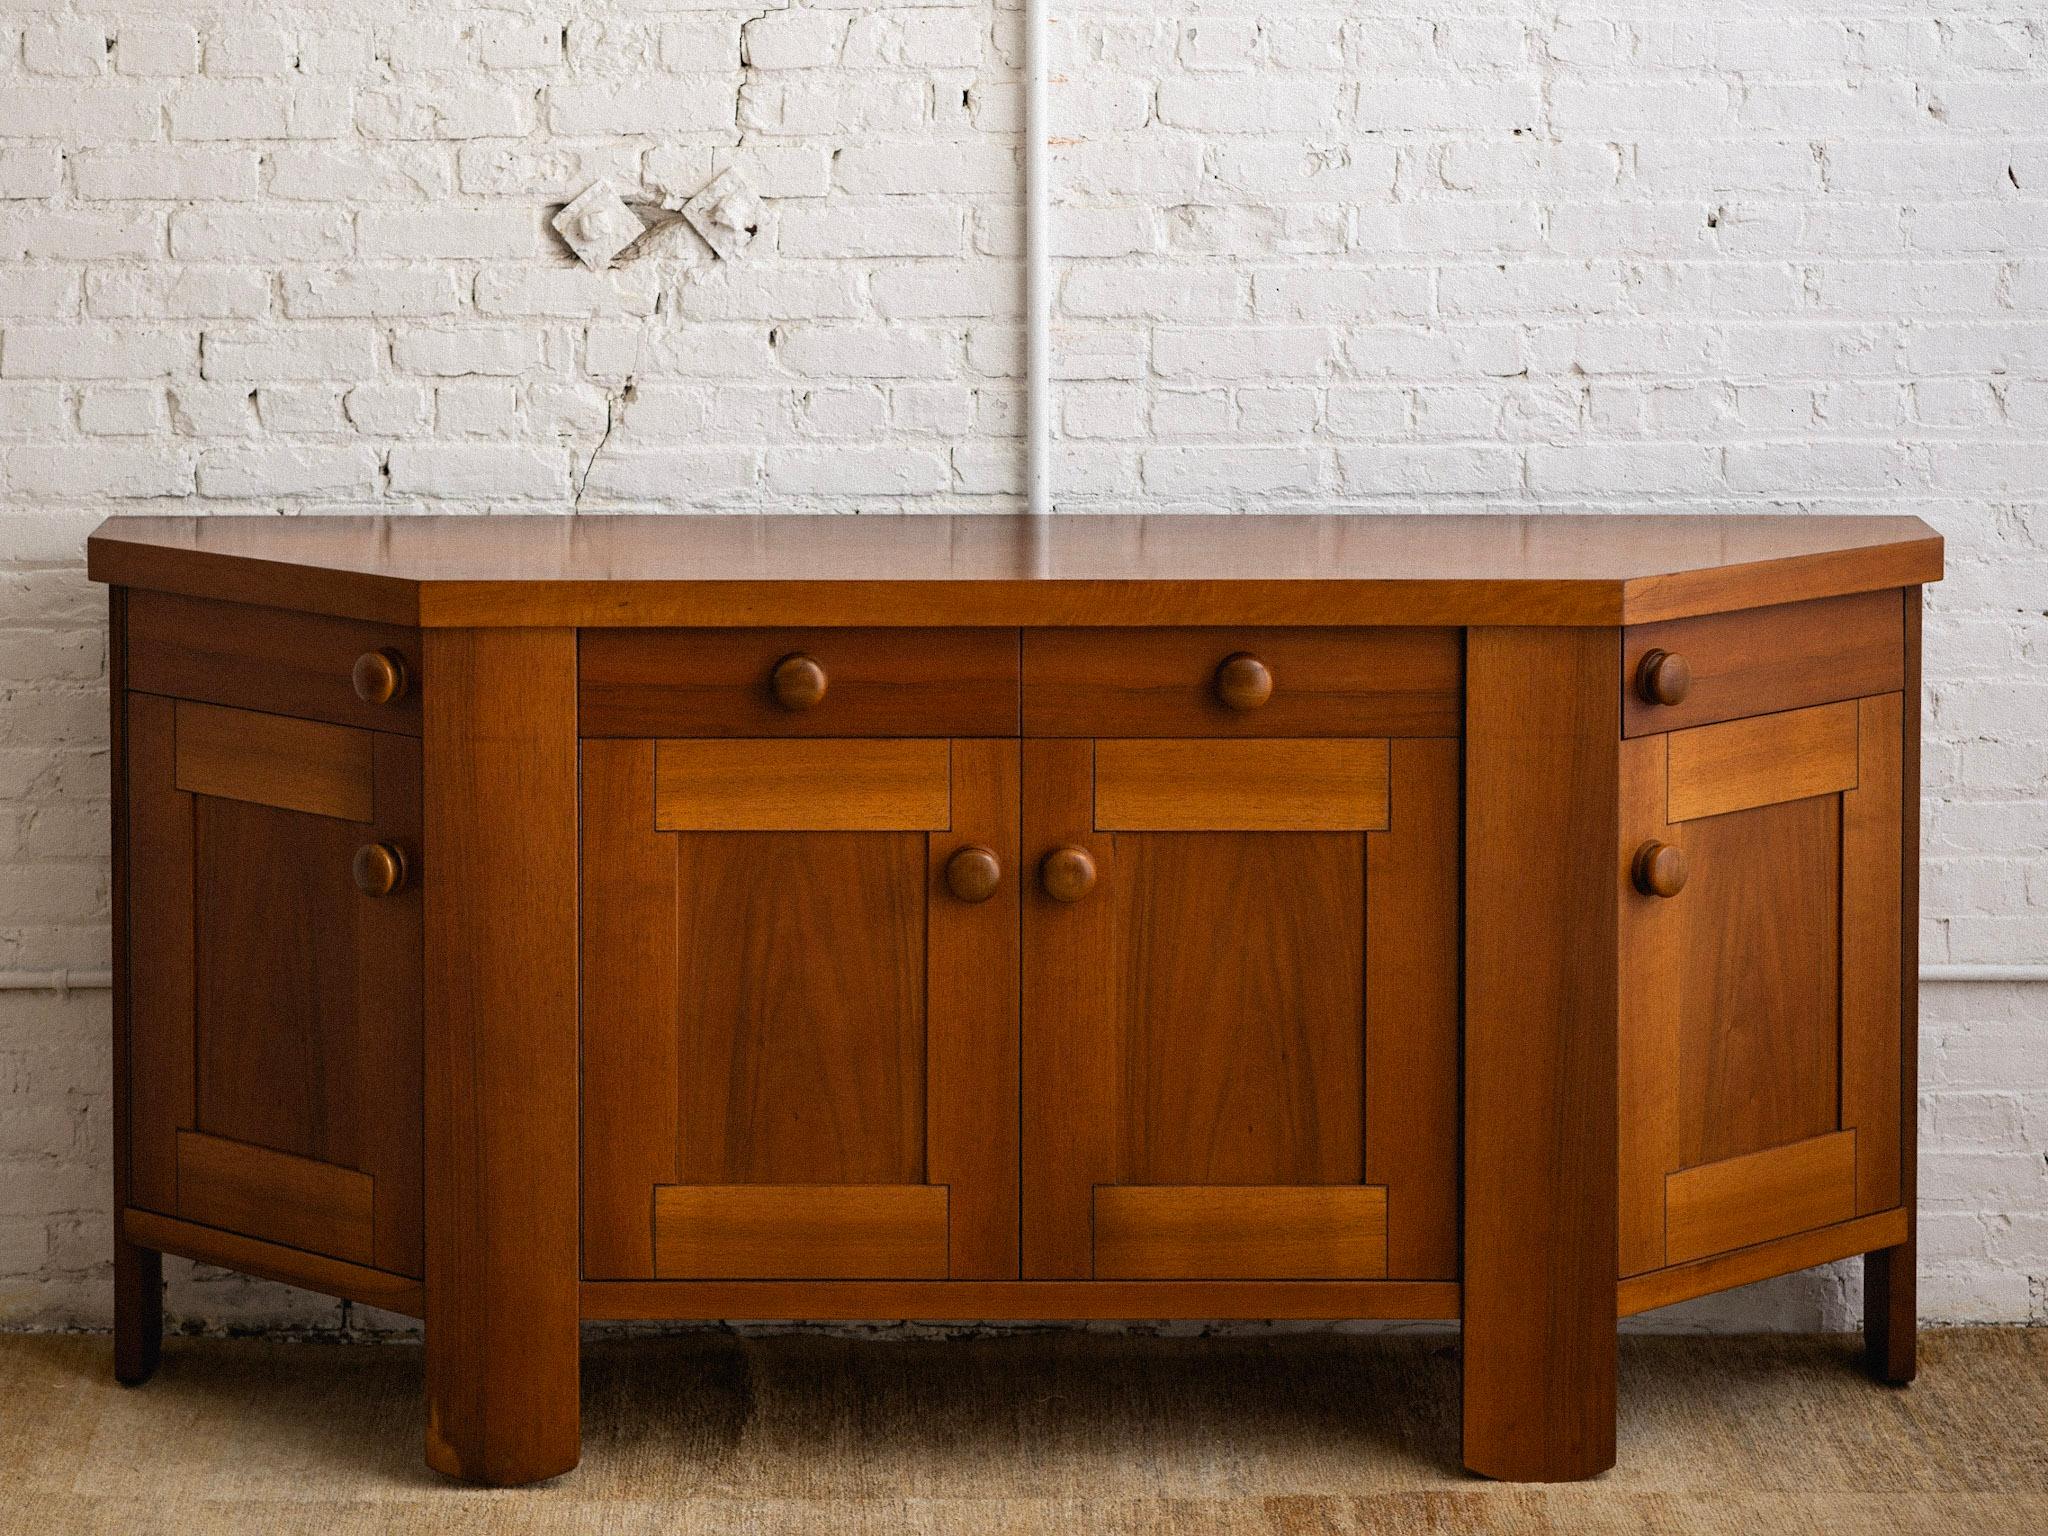 A midcentury Italian credenza / sideboard by Silvio Coppola for Bernini. Two center drawers with shelving below. Outer drawers open on a rounded track with cupboards below. Large wood pulls and a rich walnut finish. Sourced in Northern Italy.